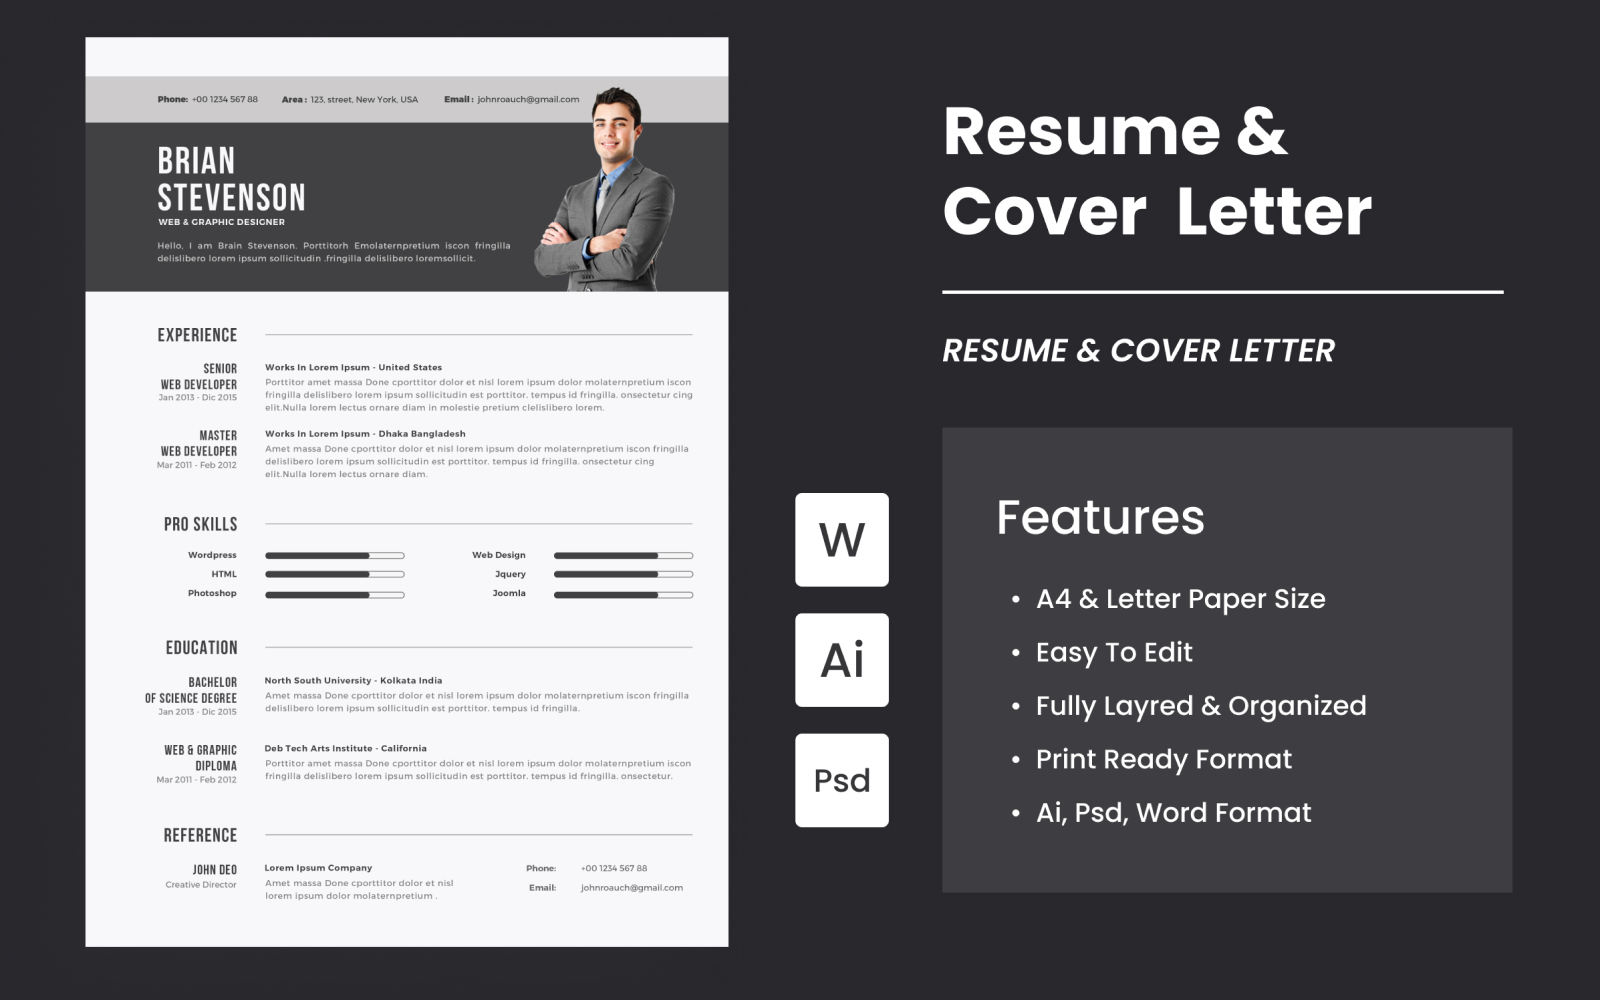 Minimalist Resume And Cover Letter Design